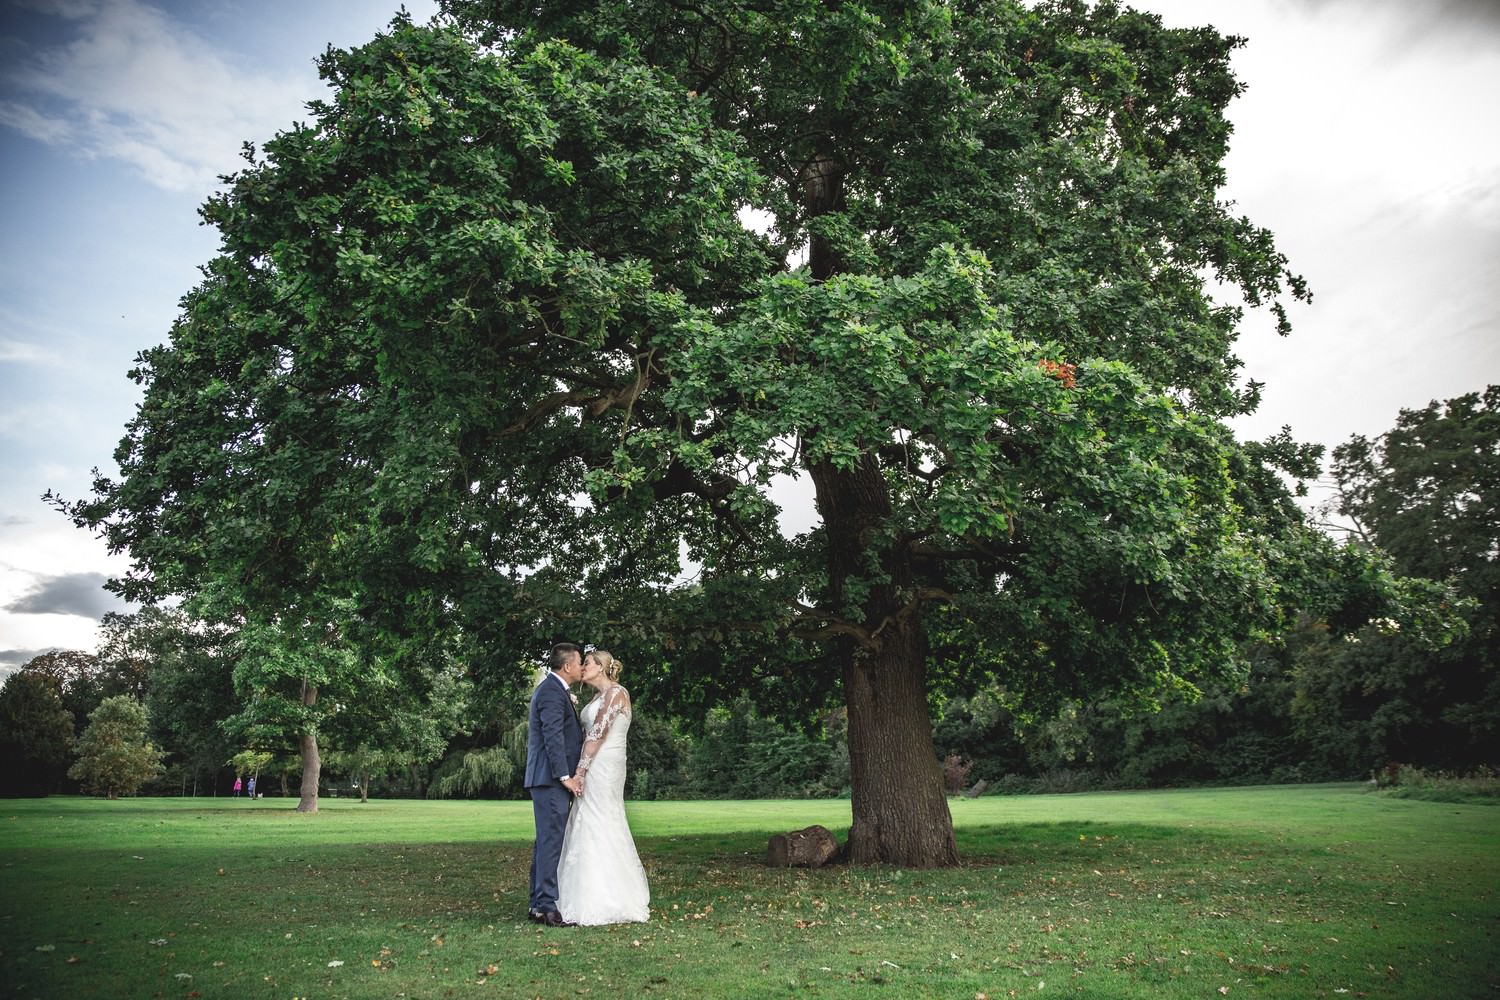 Relaxed Wedding Photography at Belair House, London